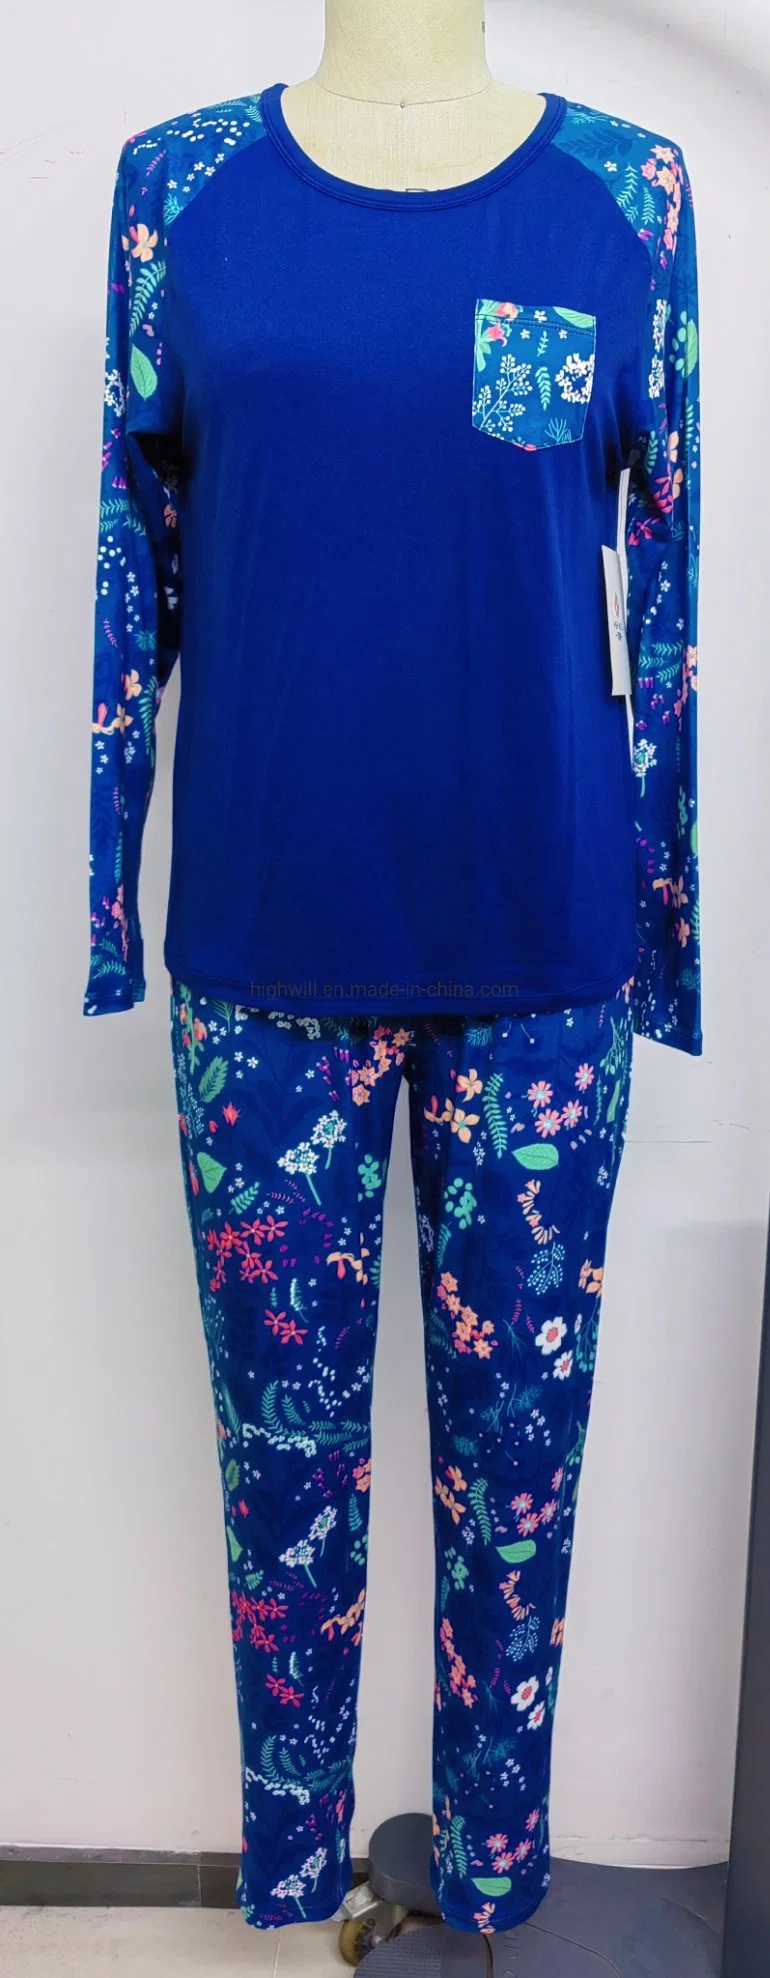 Print Knit Jersey Round Neck Long Sleeve Top with Pocket and Long Pant Set for Women